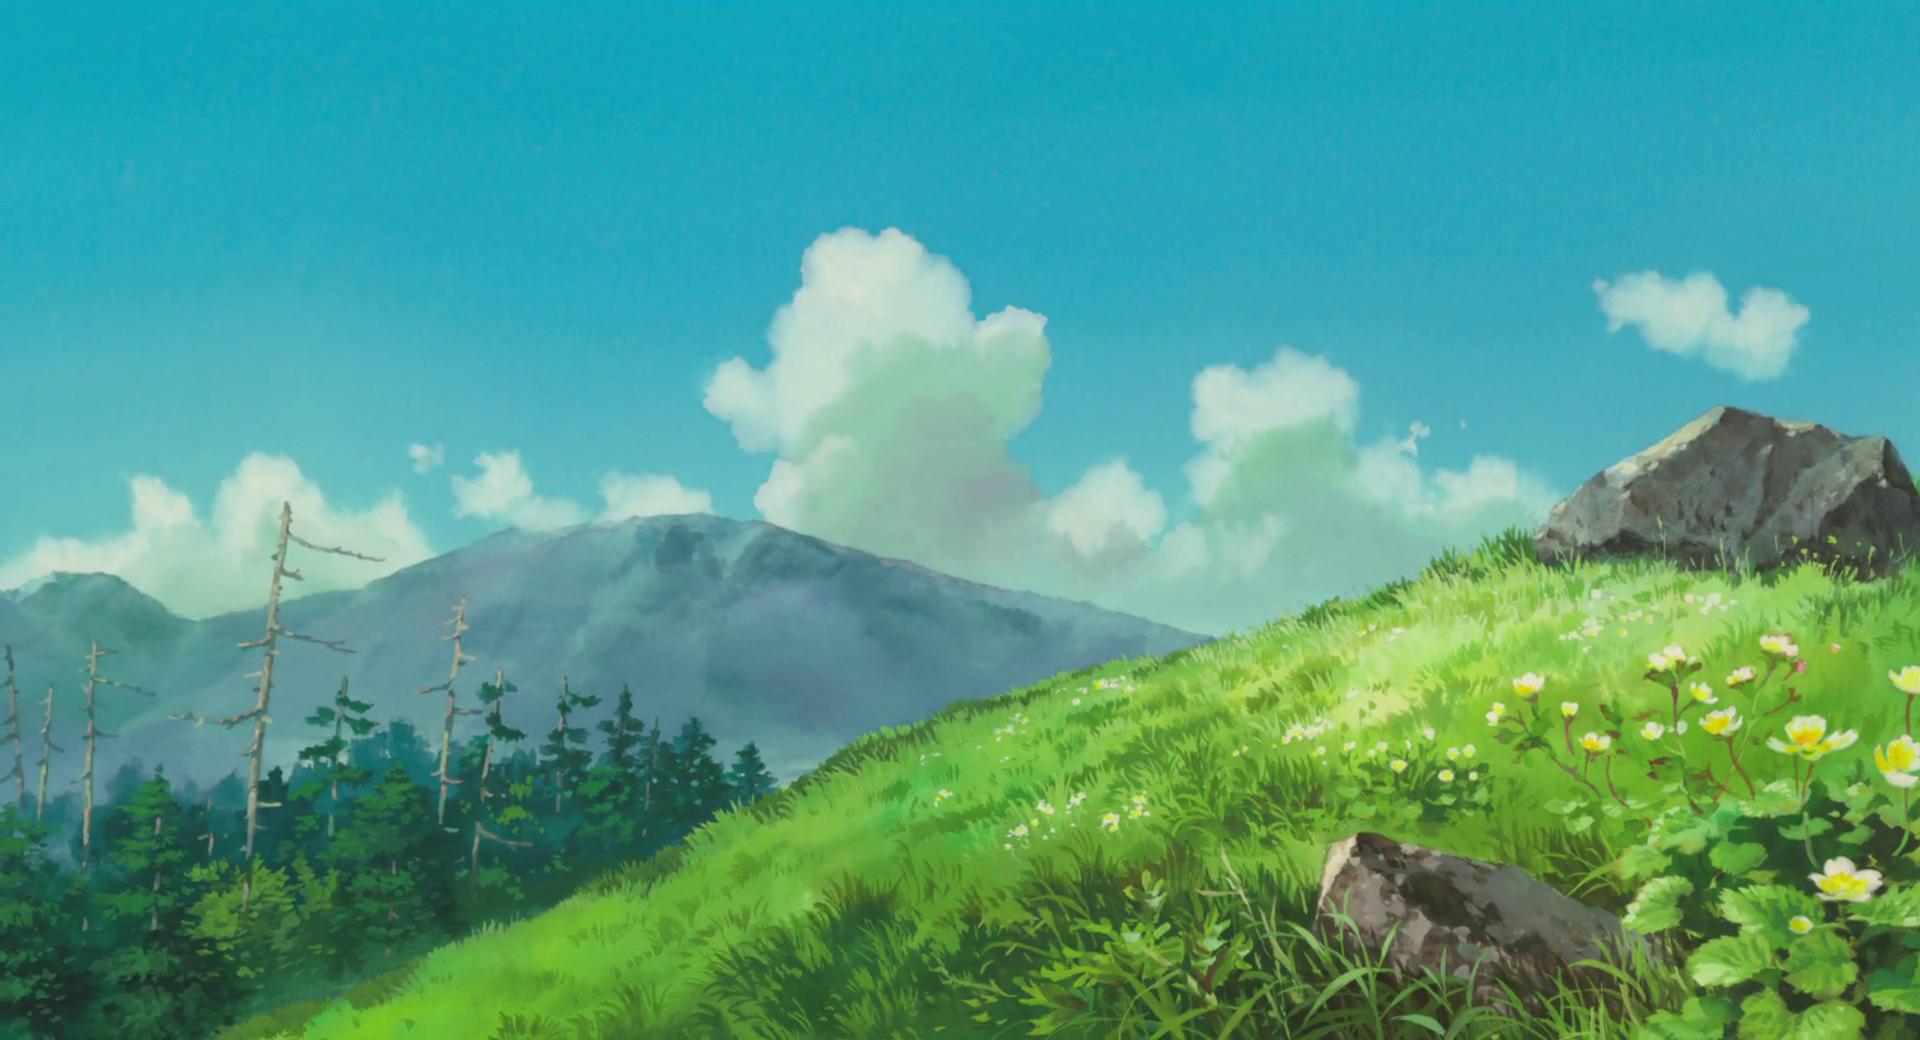 High res desktop background from The Wind Rises